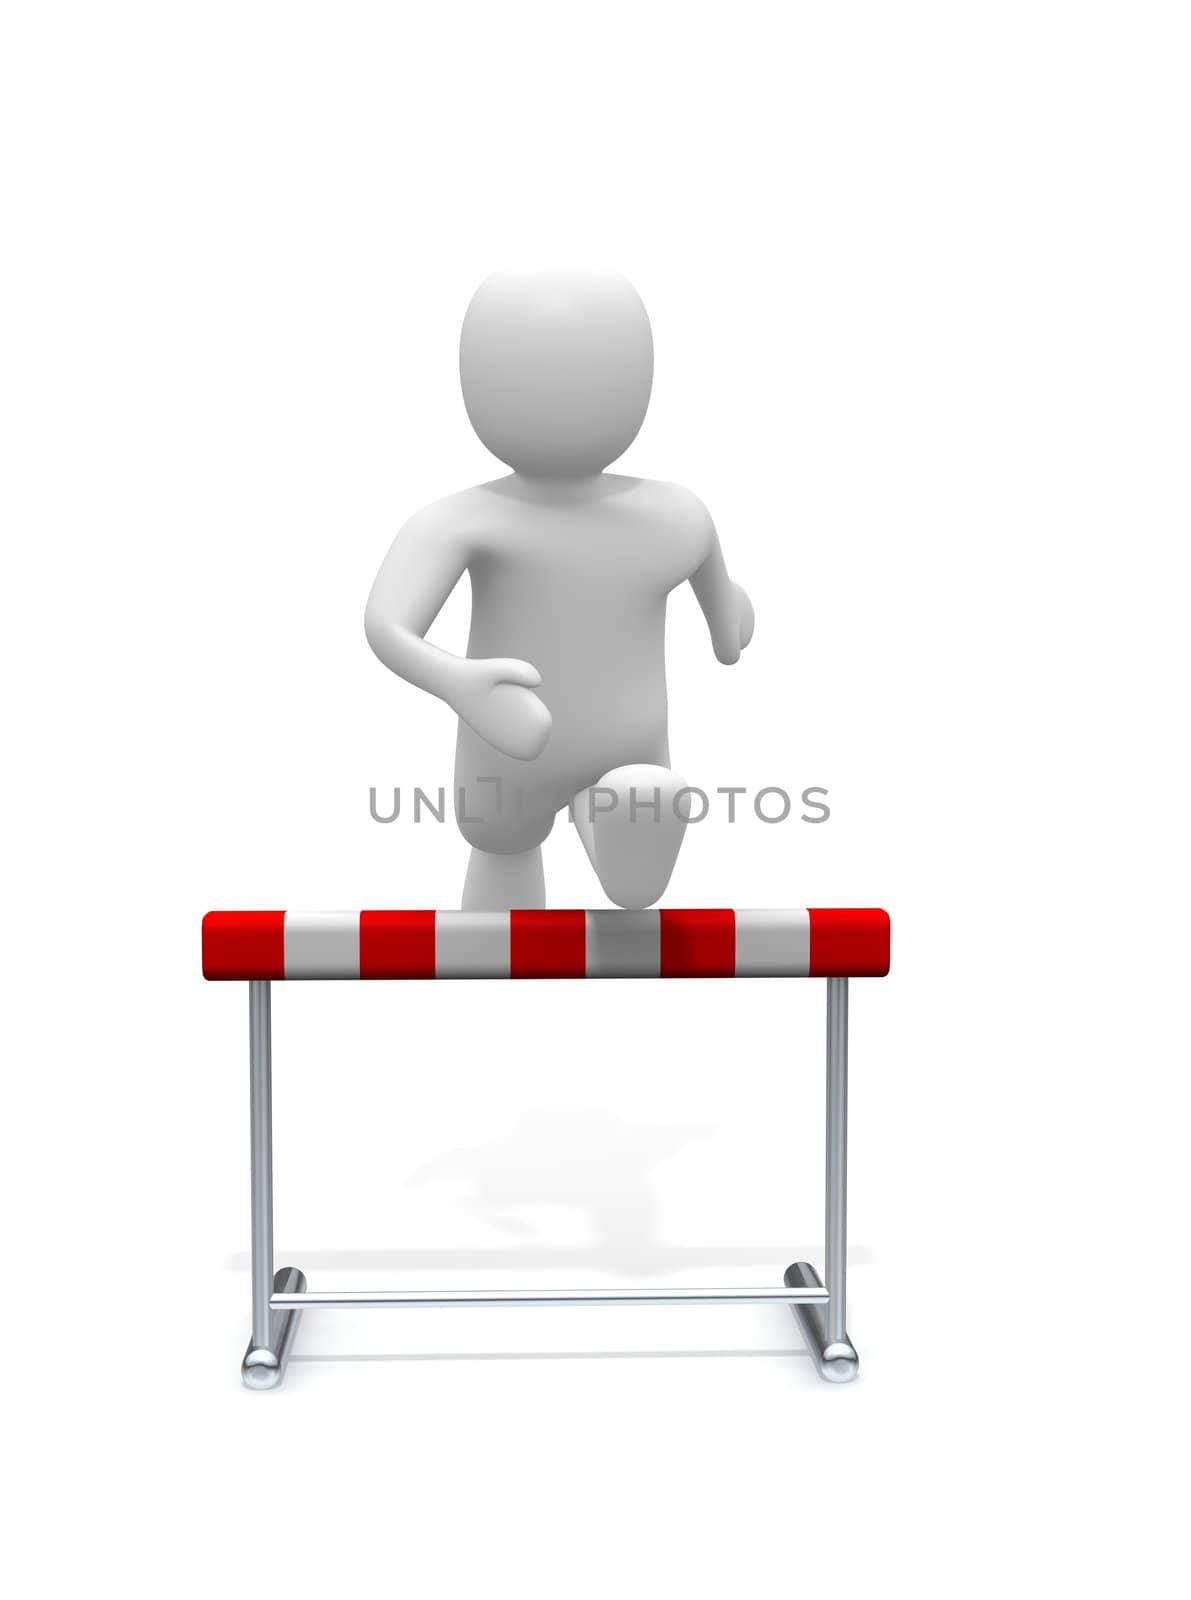 Man jumping over the hurdle. 3d rendered illustration.